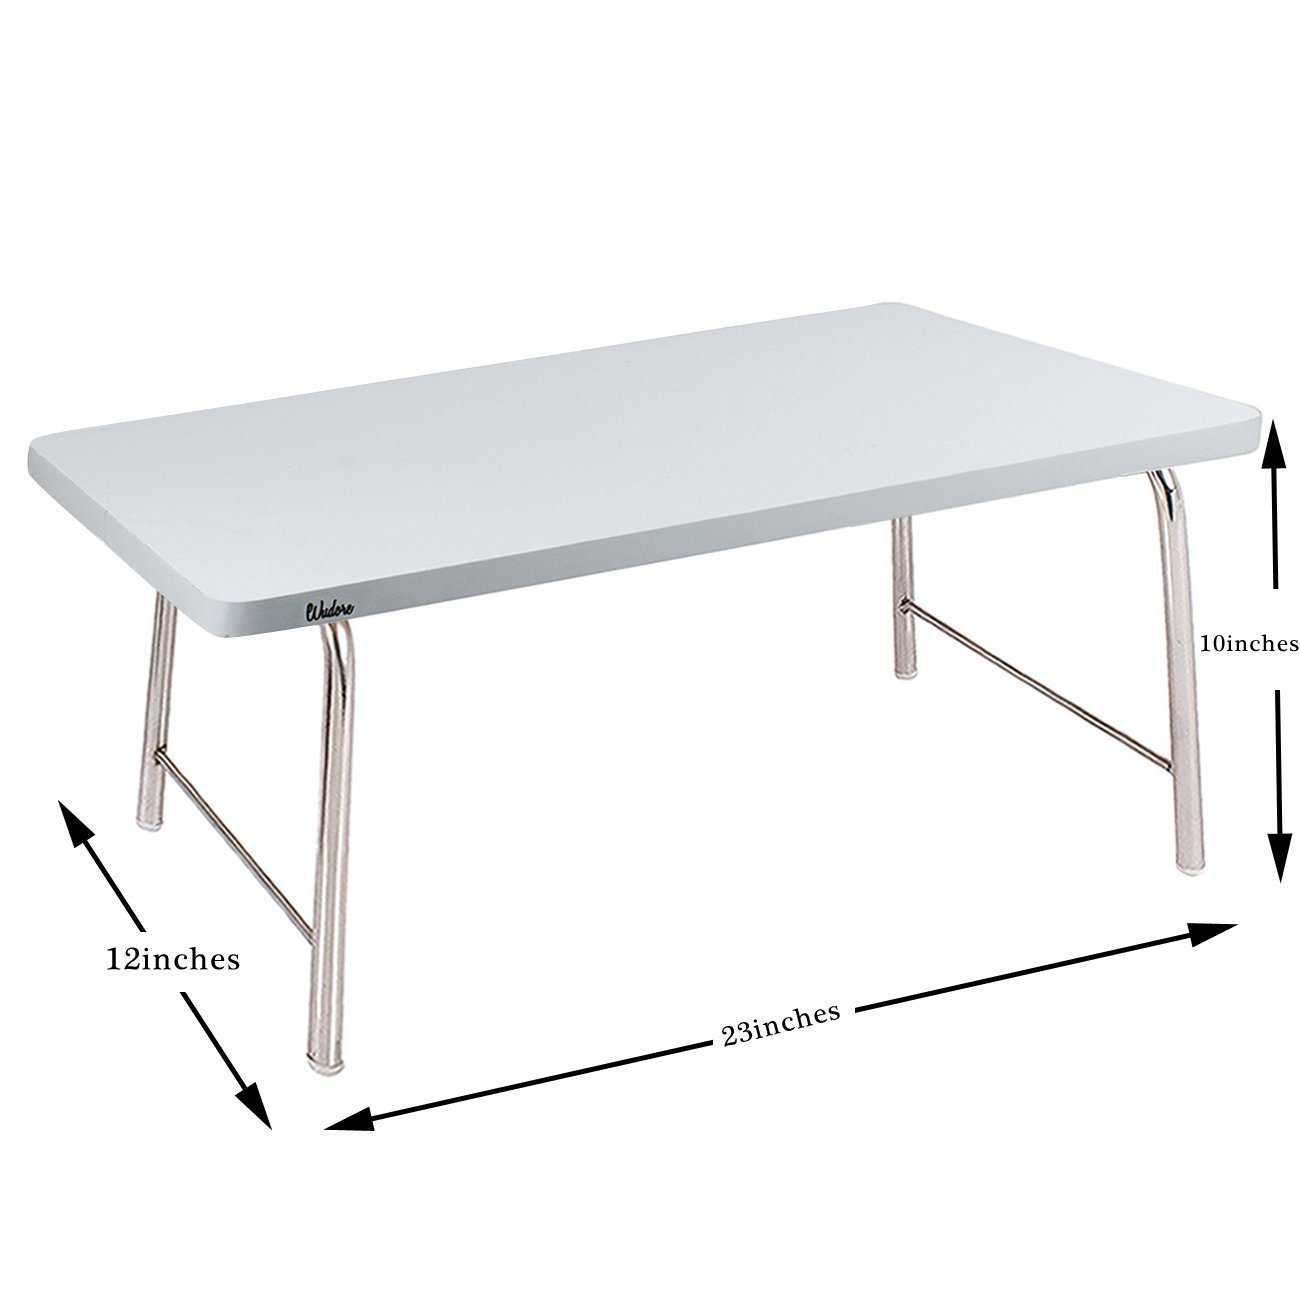 Laptop Table With Folding Steel Legs - White | Wudore